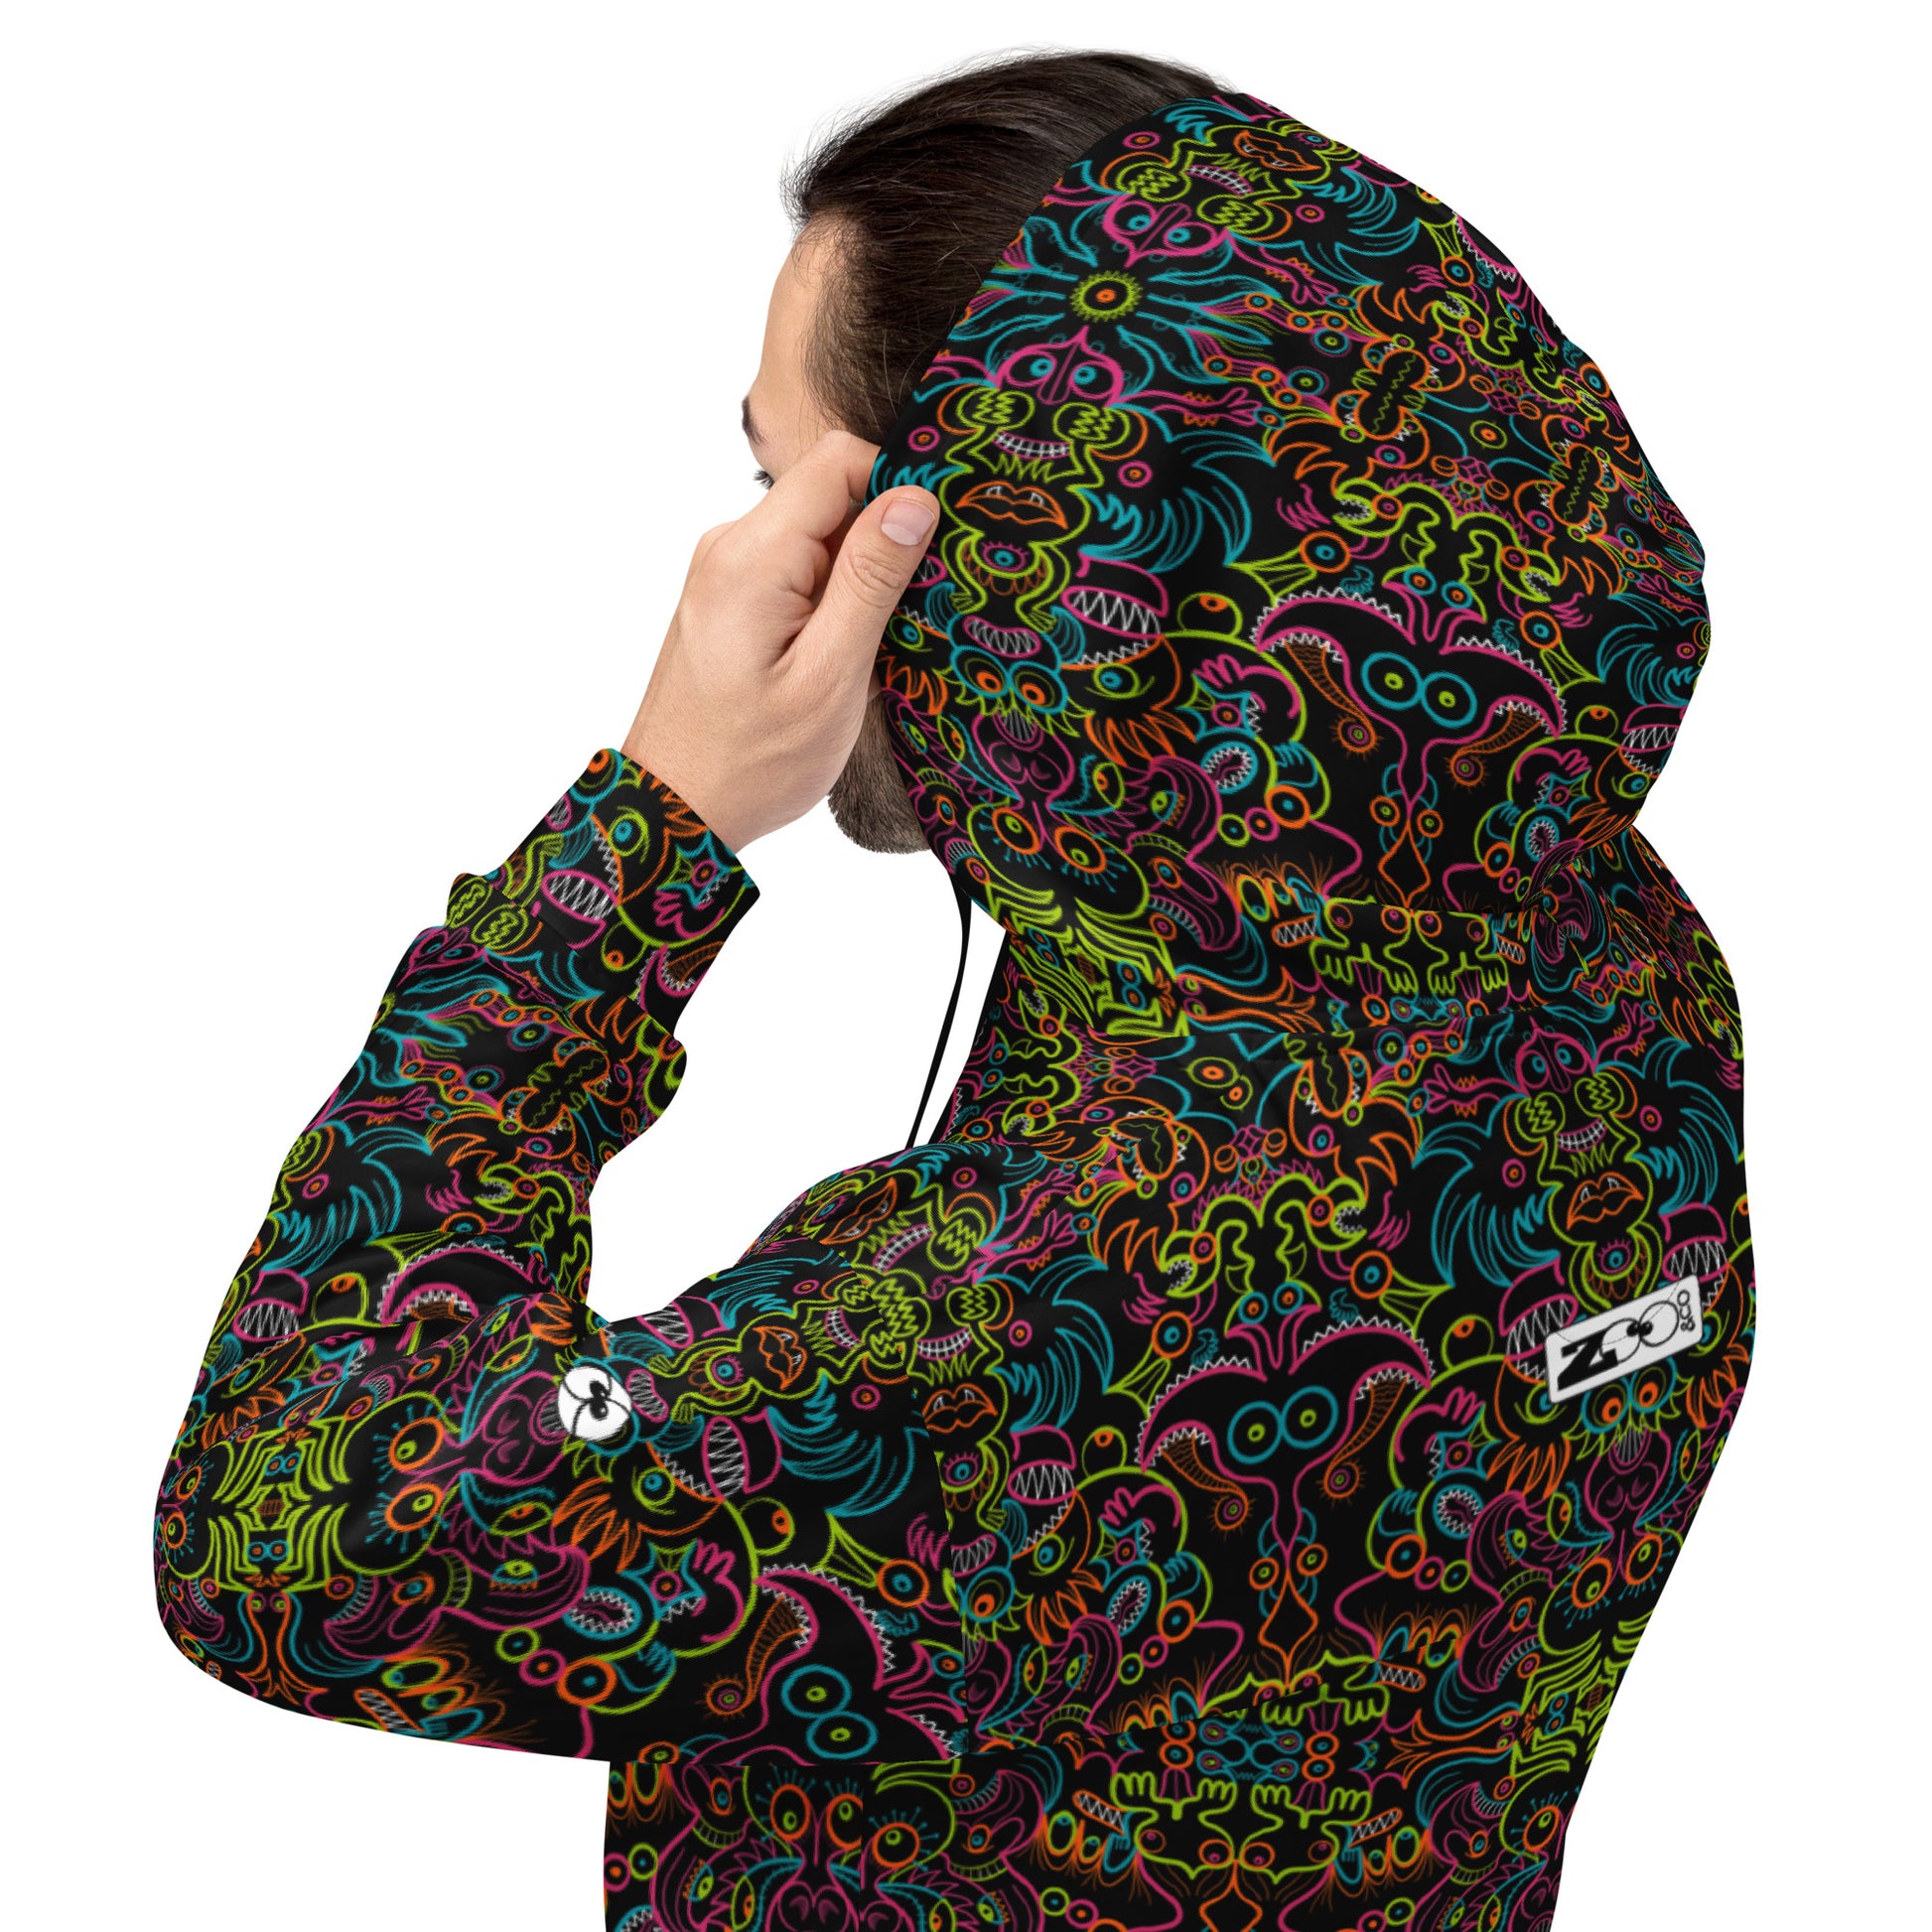 Doodle Carnival: A Kaleidoscope of Whimsical Wonders! - Unisex Hoodie. Product details